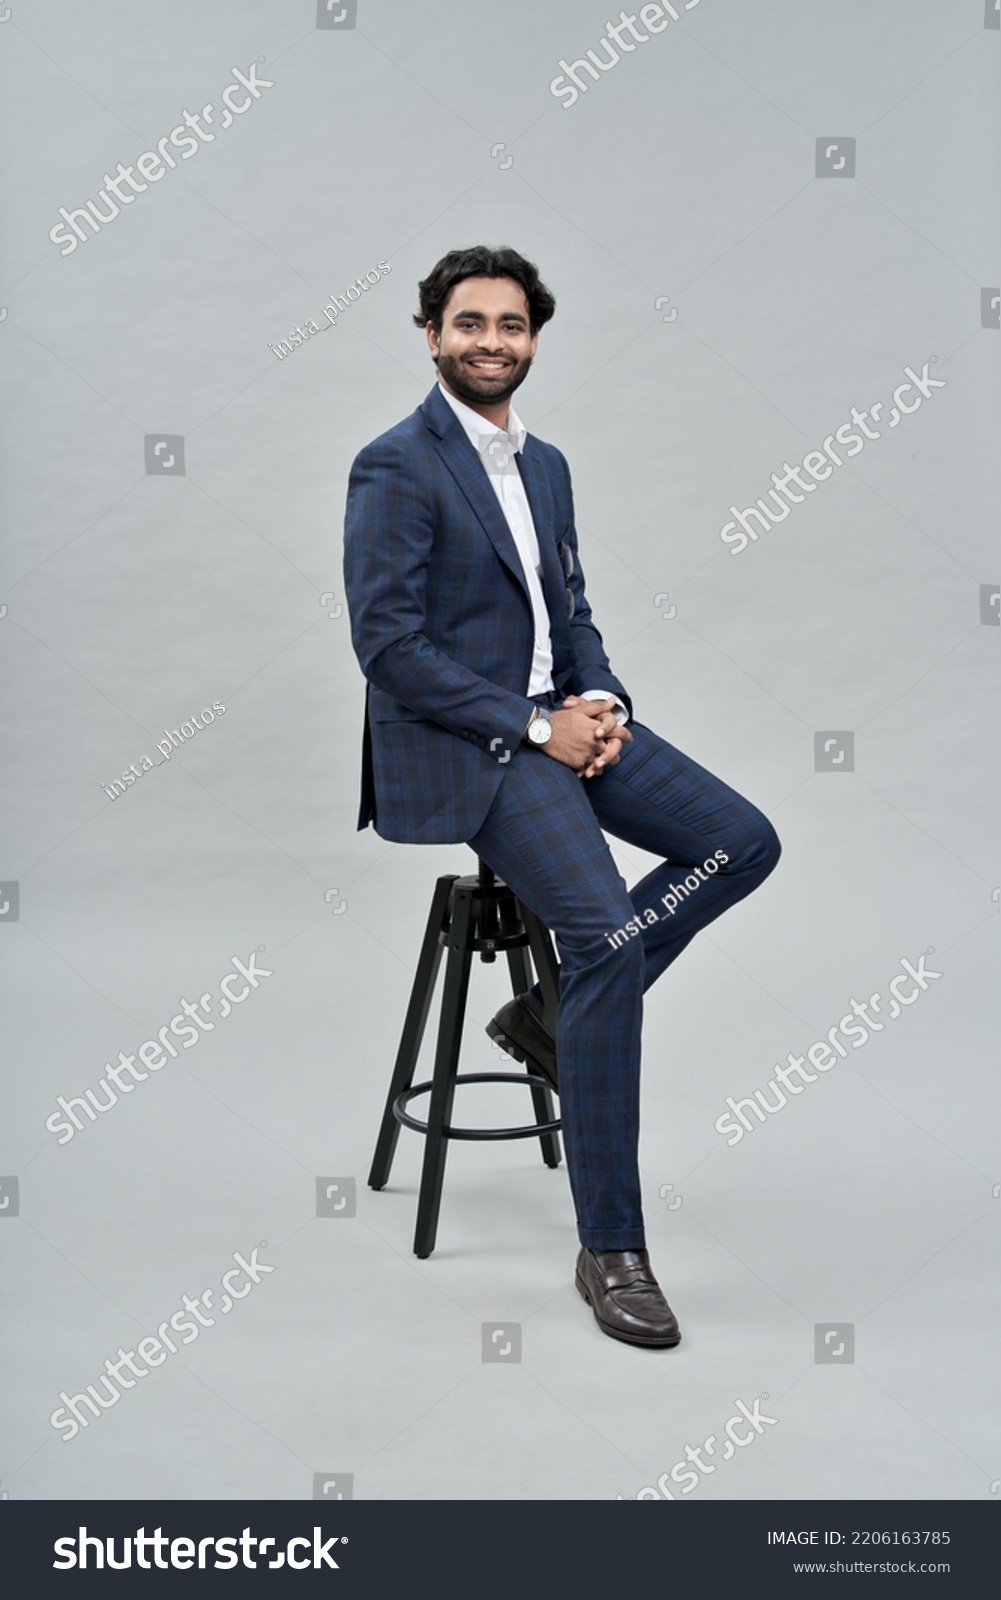 Happy successful rich young indian business man ceo leader, wealthy arab professional manager, confident male businessman executive wearing suit sitting on chair isolated on beige, vertical portrait. #2206163785